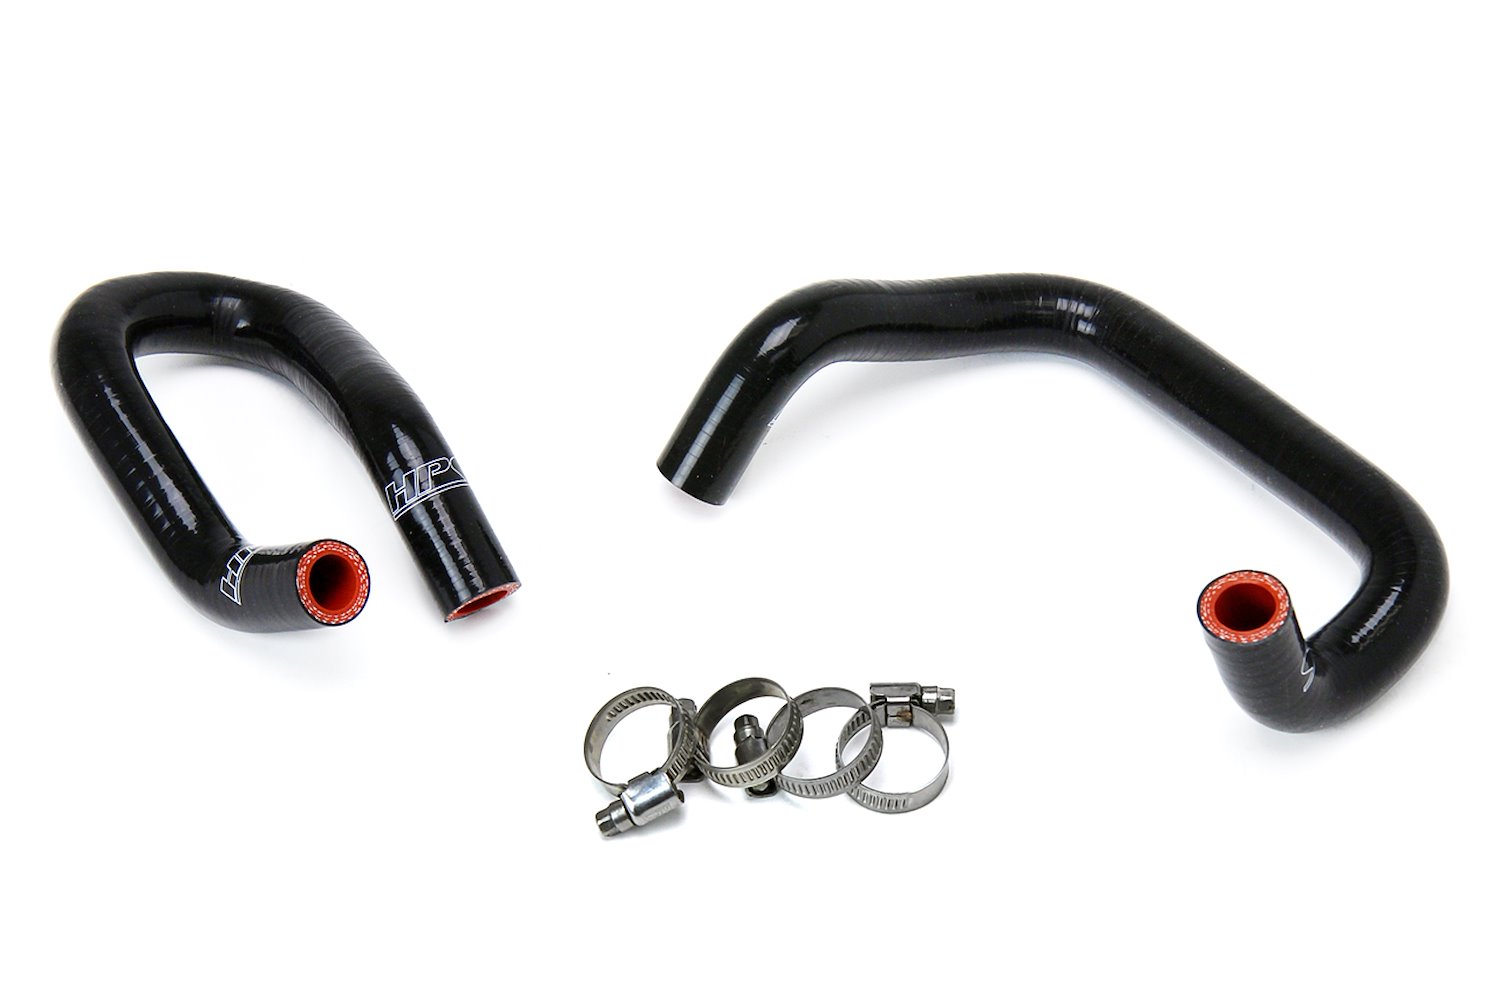 57-1586-BLK Heater Hose Kit, High-Temp 3-Ply Reinforced Silicone, Replace OEM Rubber Heater Coolant Hoses